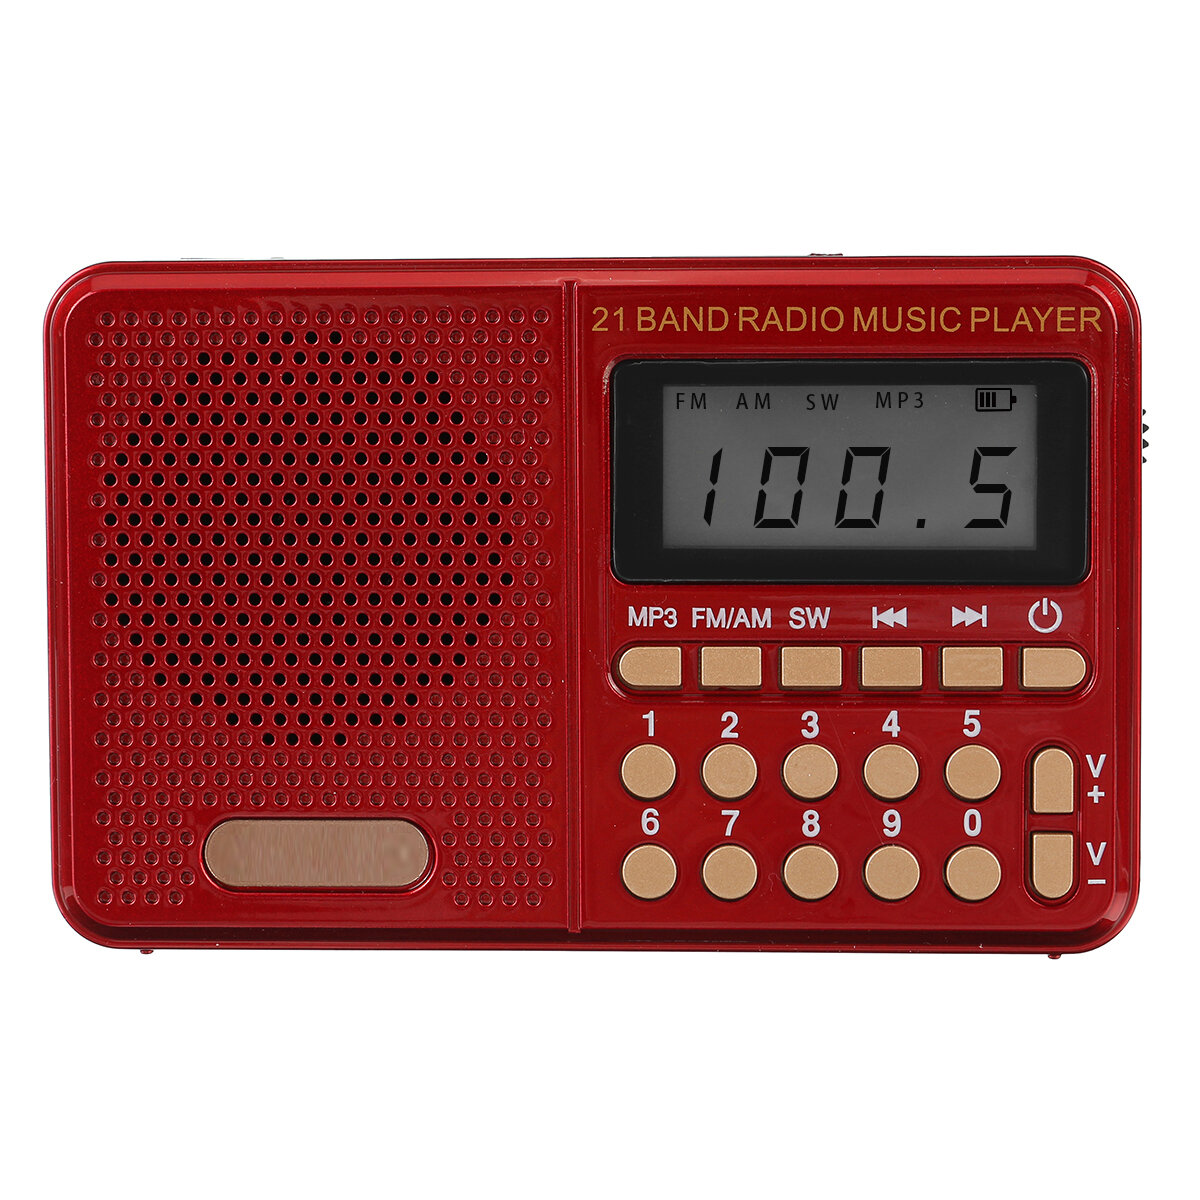 

Radio Music Player Portable Digital FM AM SW Radio Stereo Speaker Rechargeable MP3 Player Support TF Card